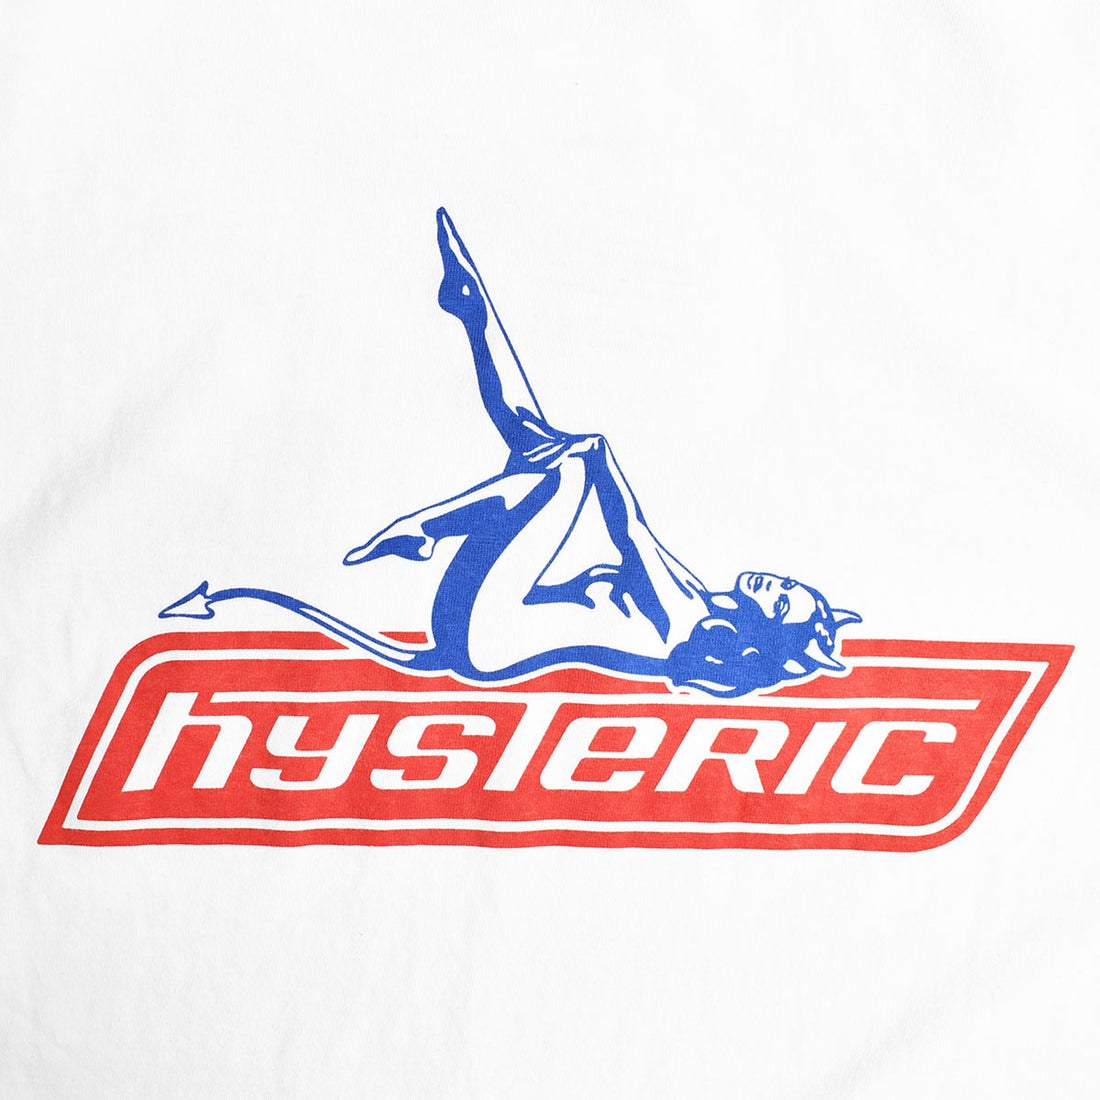 [HYSTERIC GLAMOUR]MOTOR CITY FEVER Tシャツ/WHITE(02233CL05)